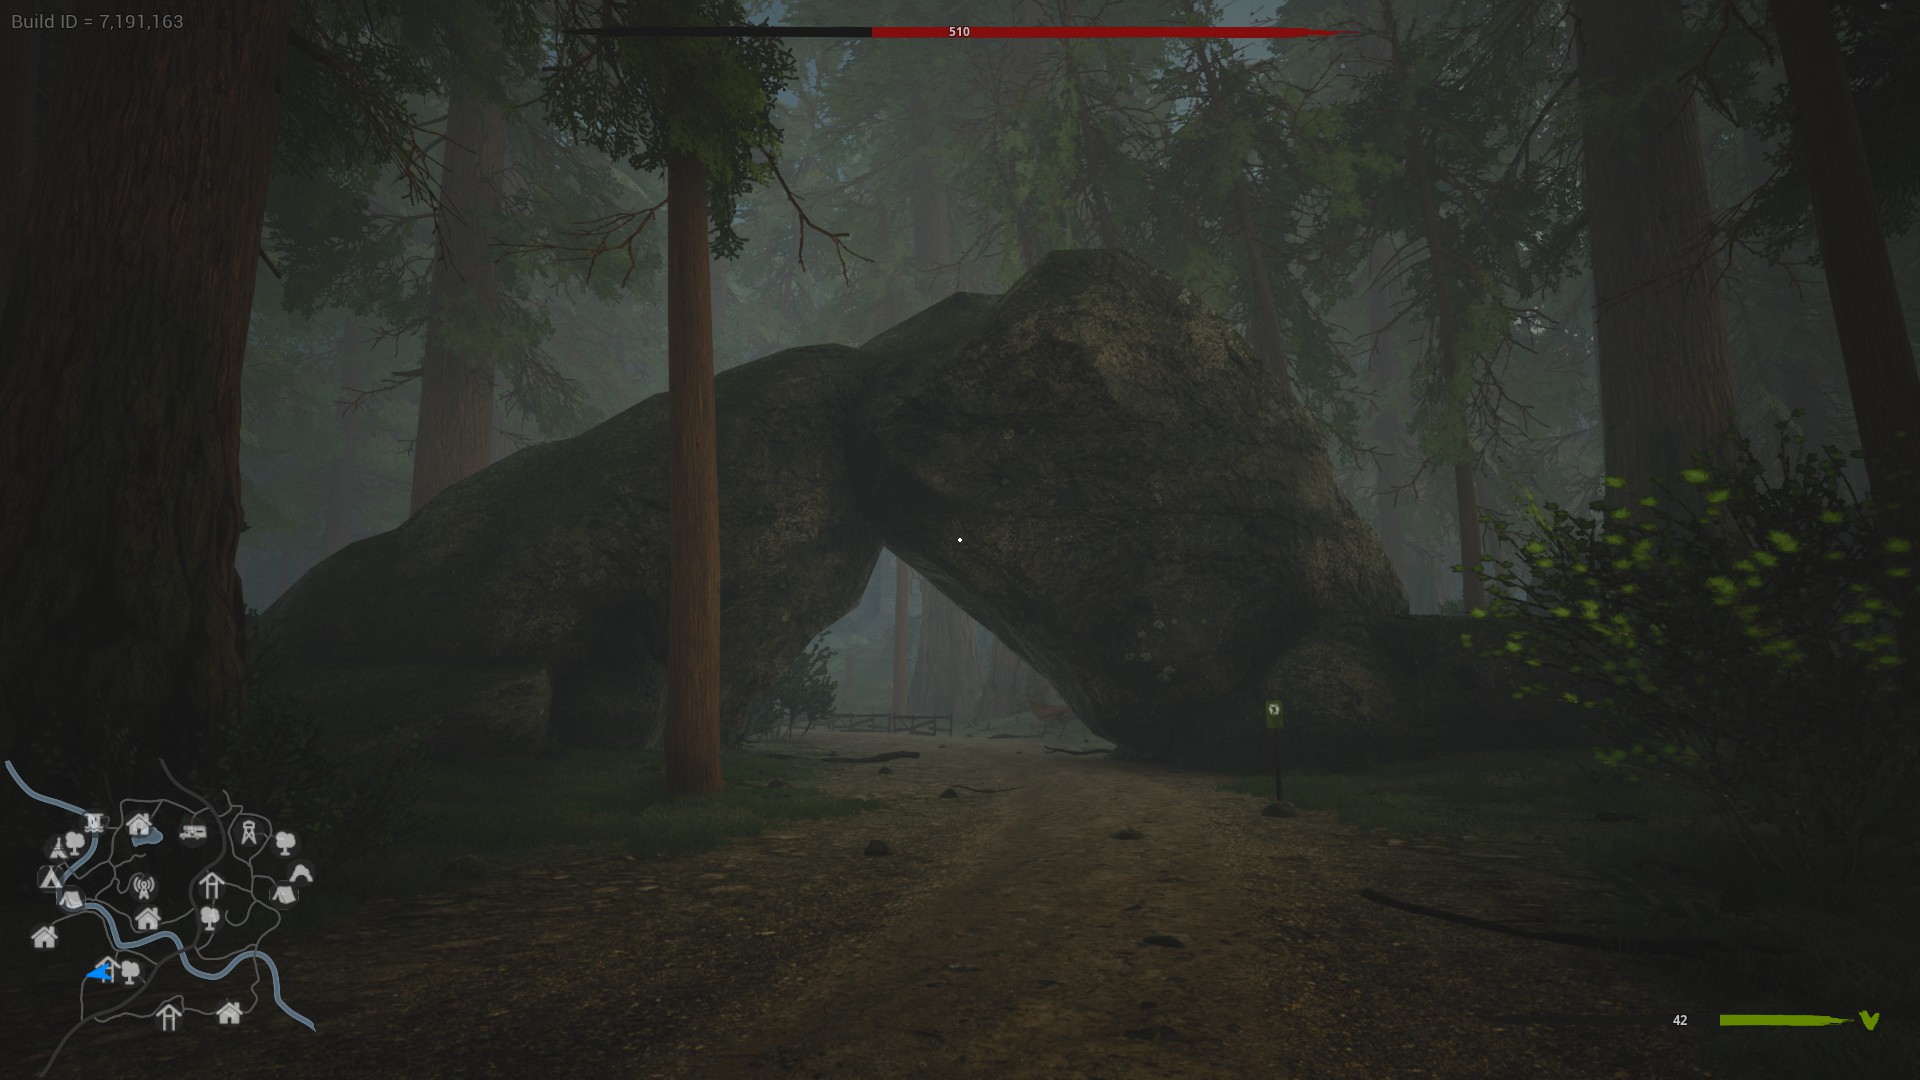 BIGFOOT How to Meet Aliens in Game Guide - 3- Go to the Archway in south - 5E87629